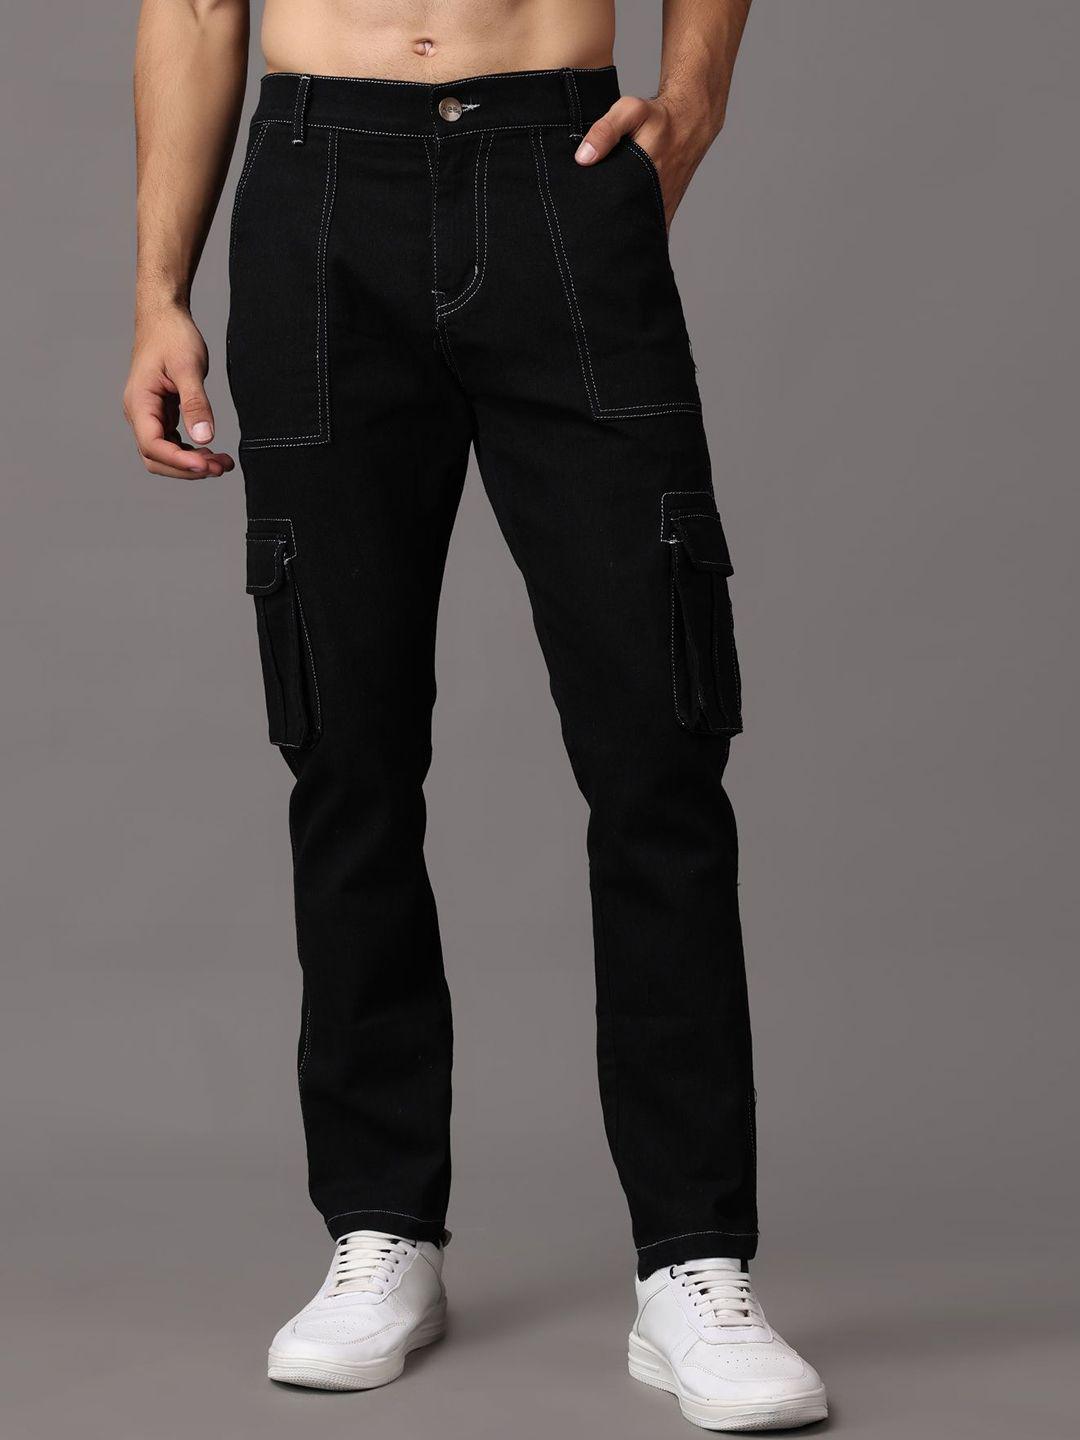 xee men black jean mildly distressed stretchable jeans